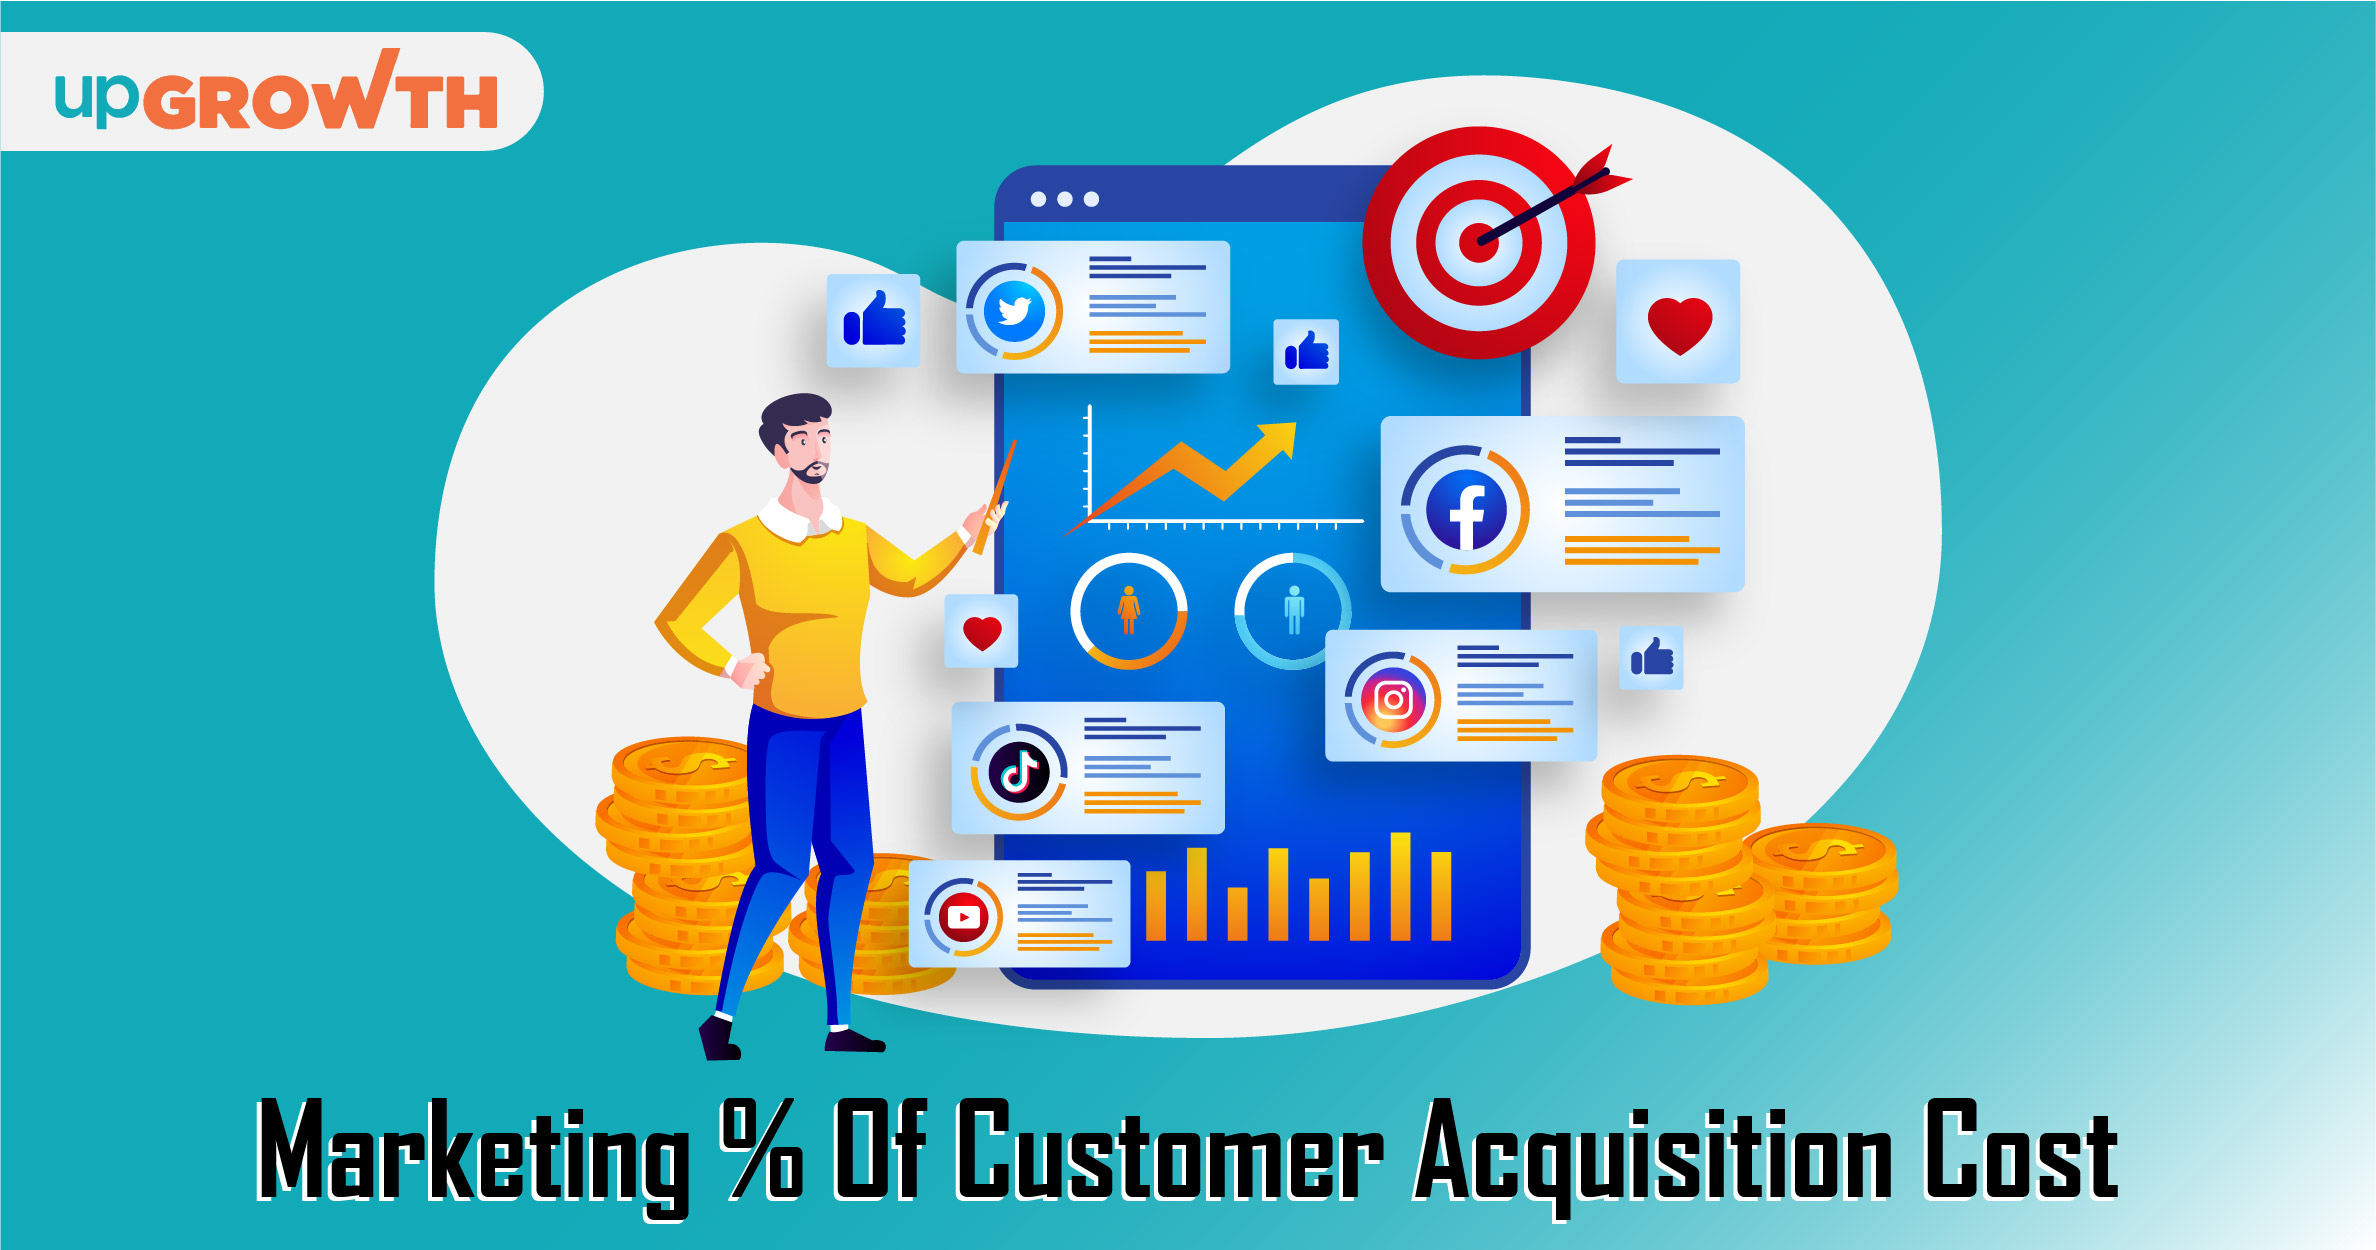 Marketing % Of Customer Acquisition Cost